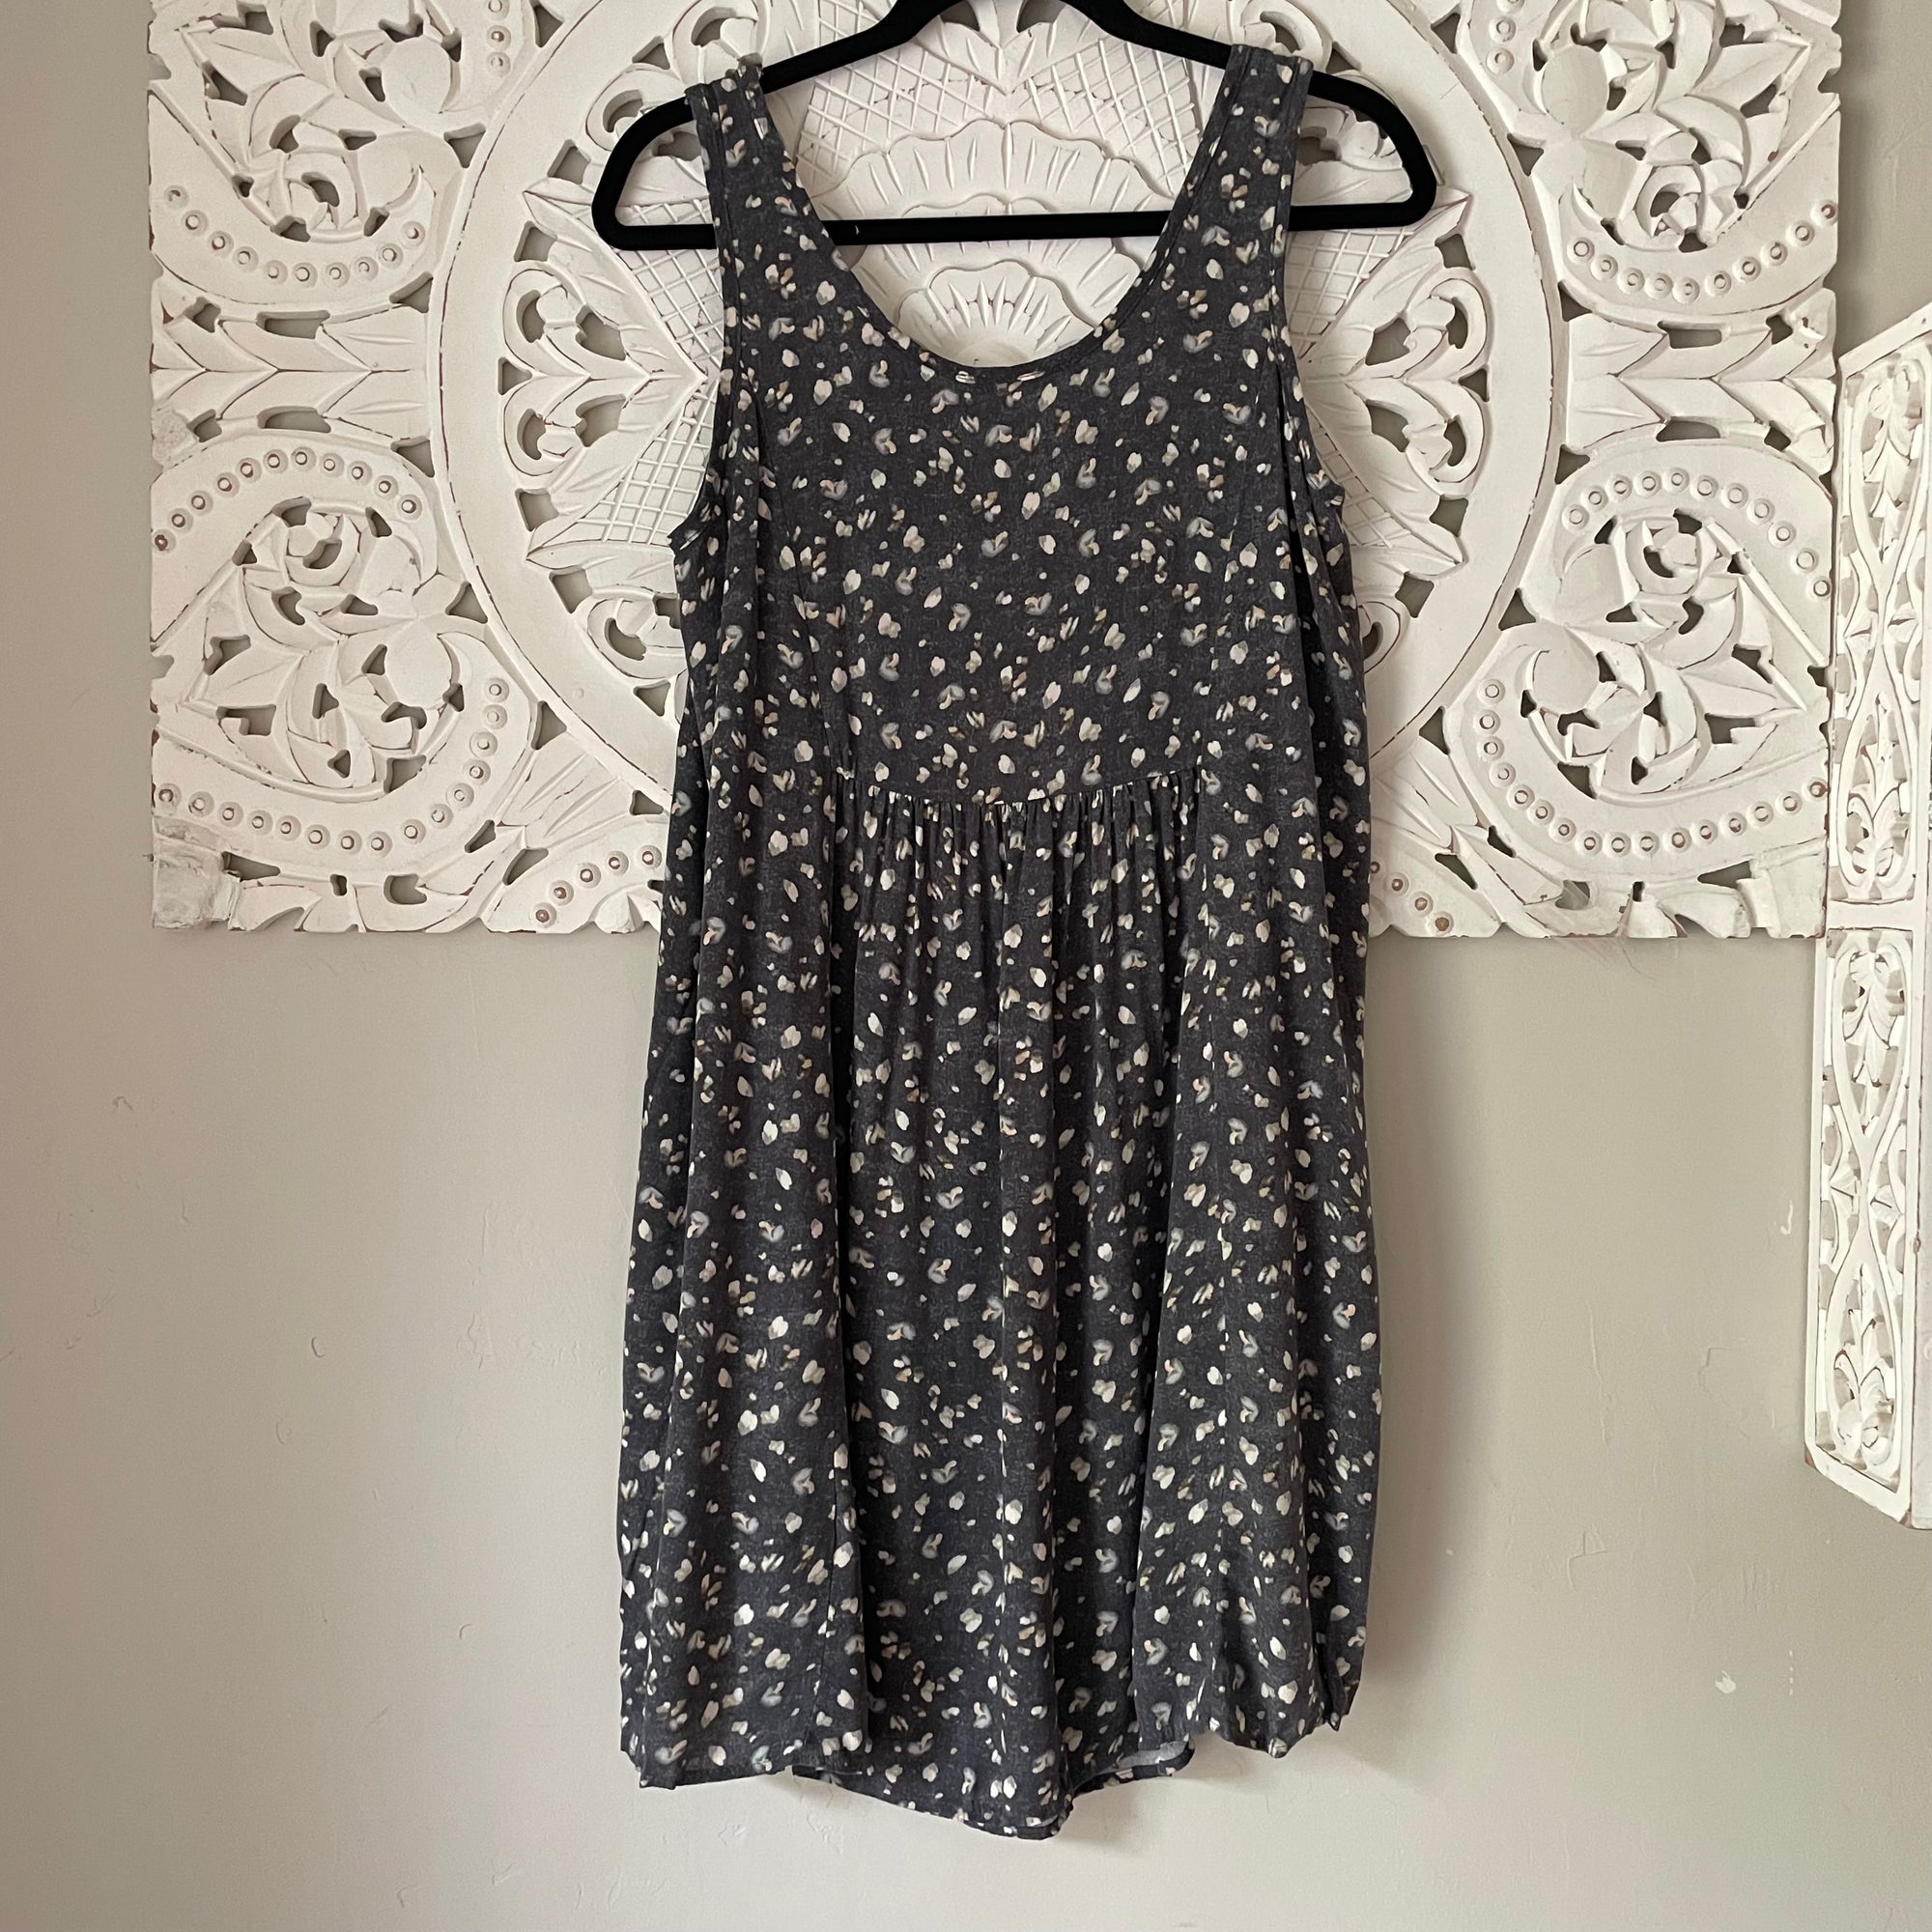 Easy Going Babydoll Print Dress in Charcoal